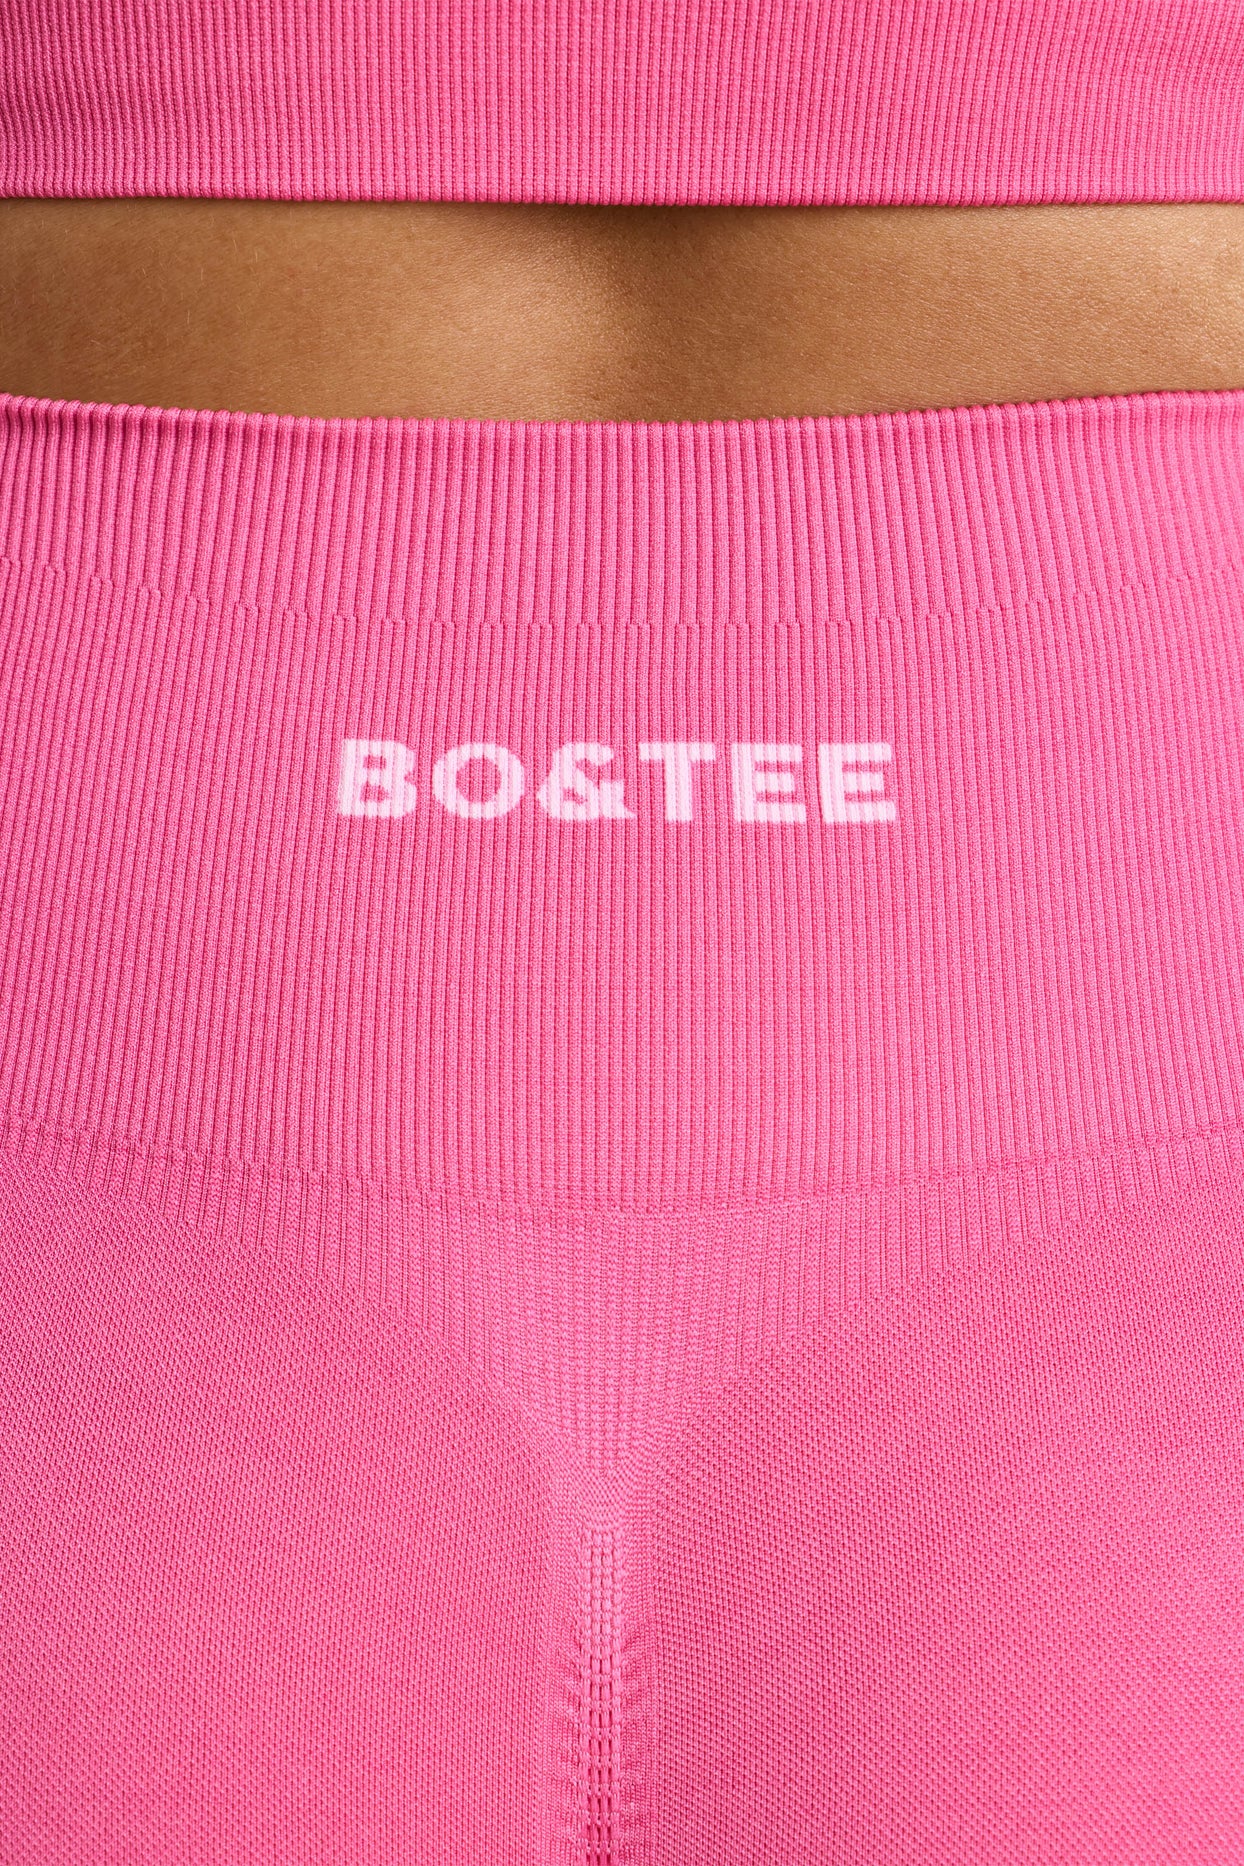 Admired Petite High-Waist Define Luxe Leggings in Hot Pink | Oh Polly